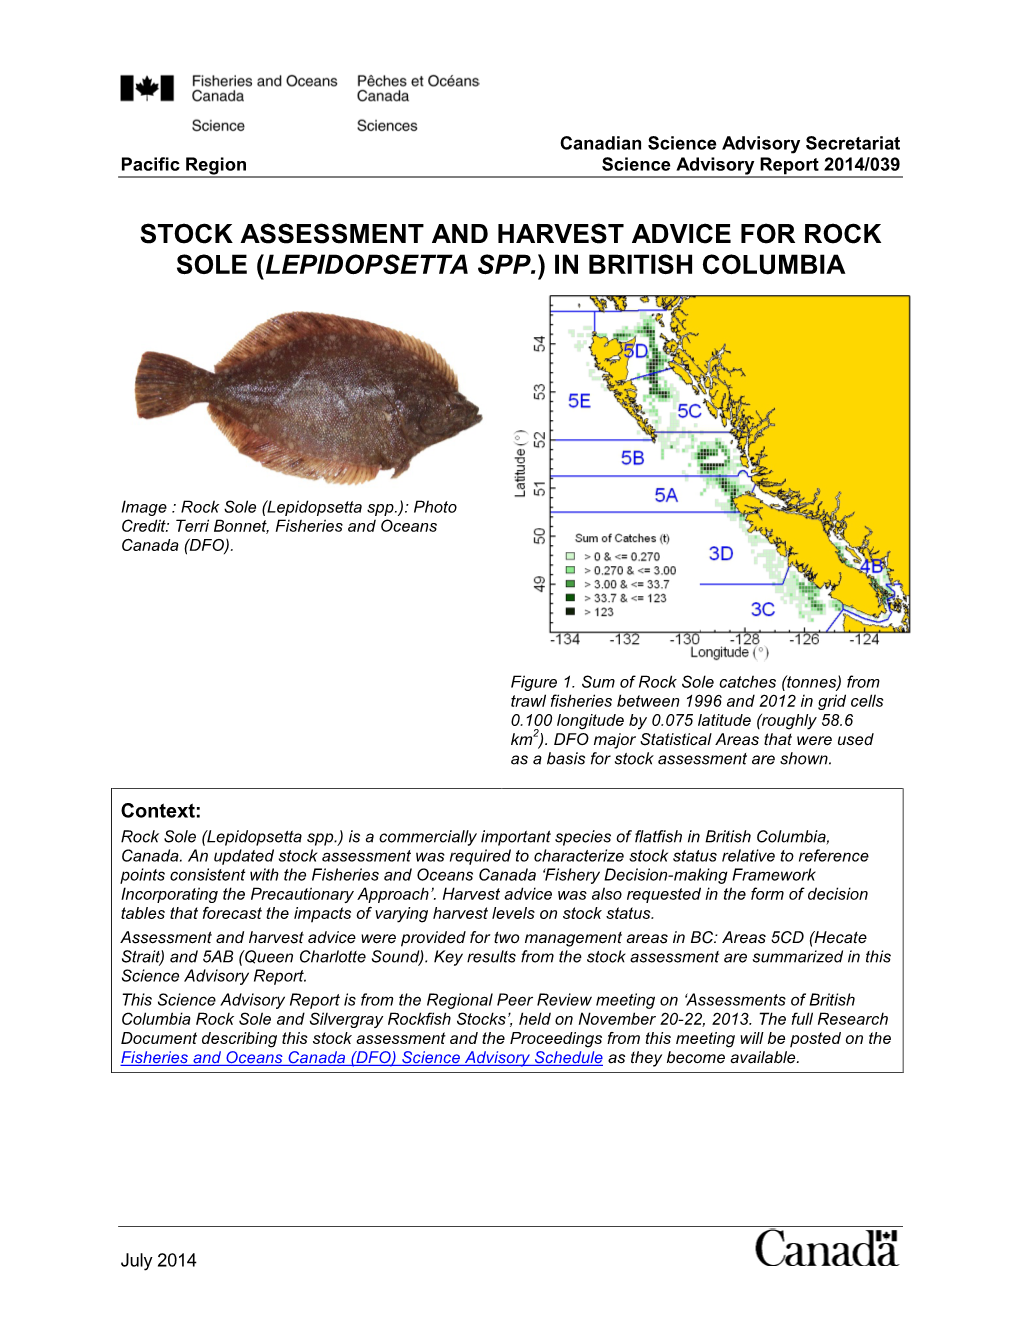 Stock Assessment and Harvest Advice for Rock Sole (Lepidopsetta Spp.) in British Columbia